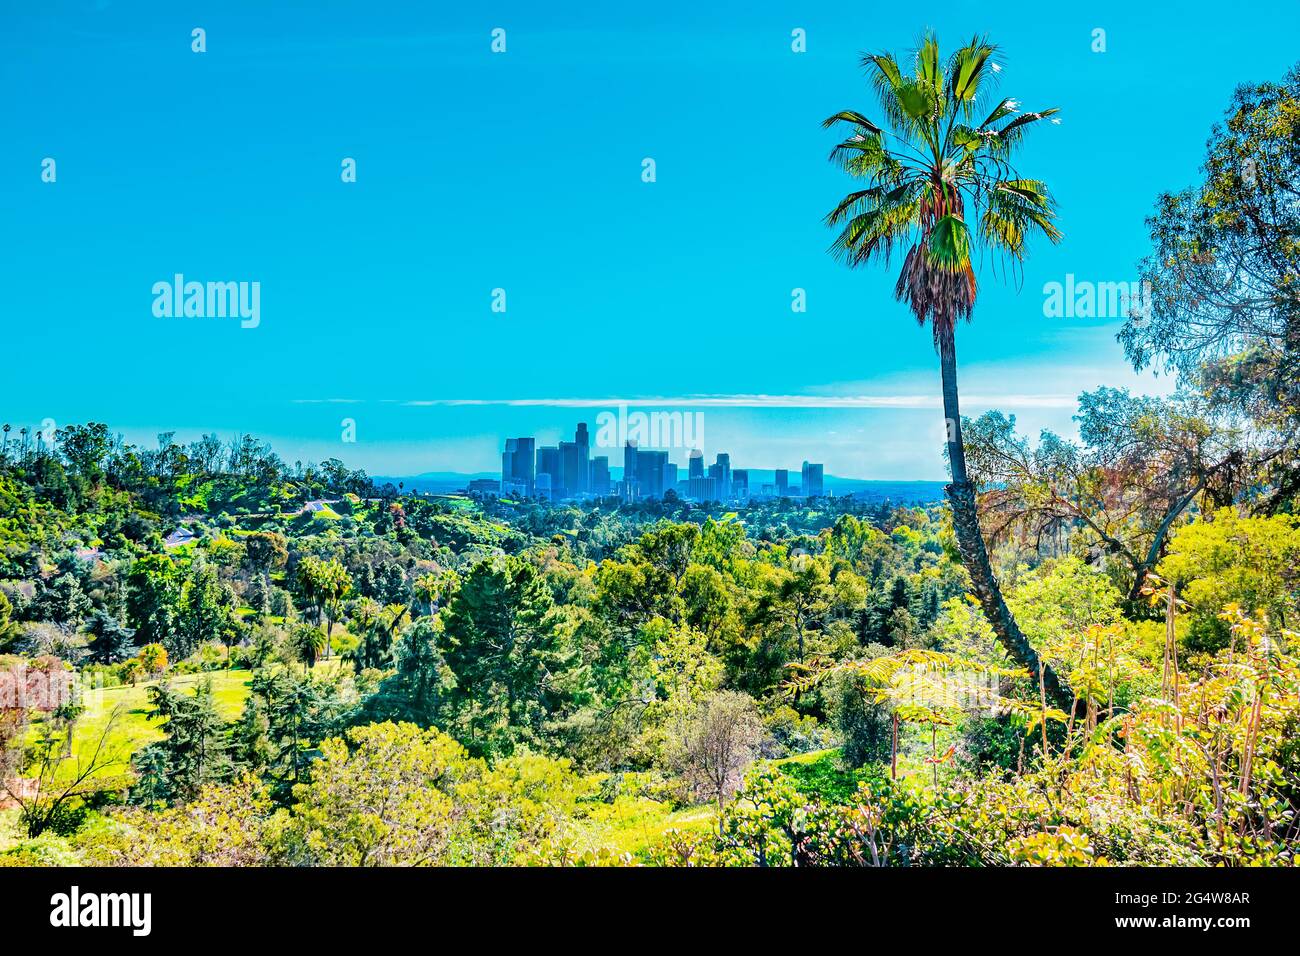 A tree filled hilltop view of the Los Angeles skyline shows skyscrapers, and multiple types of businesses.  The hills and trees are part of the huge E Stock Photo